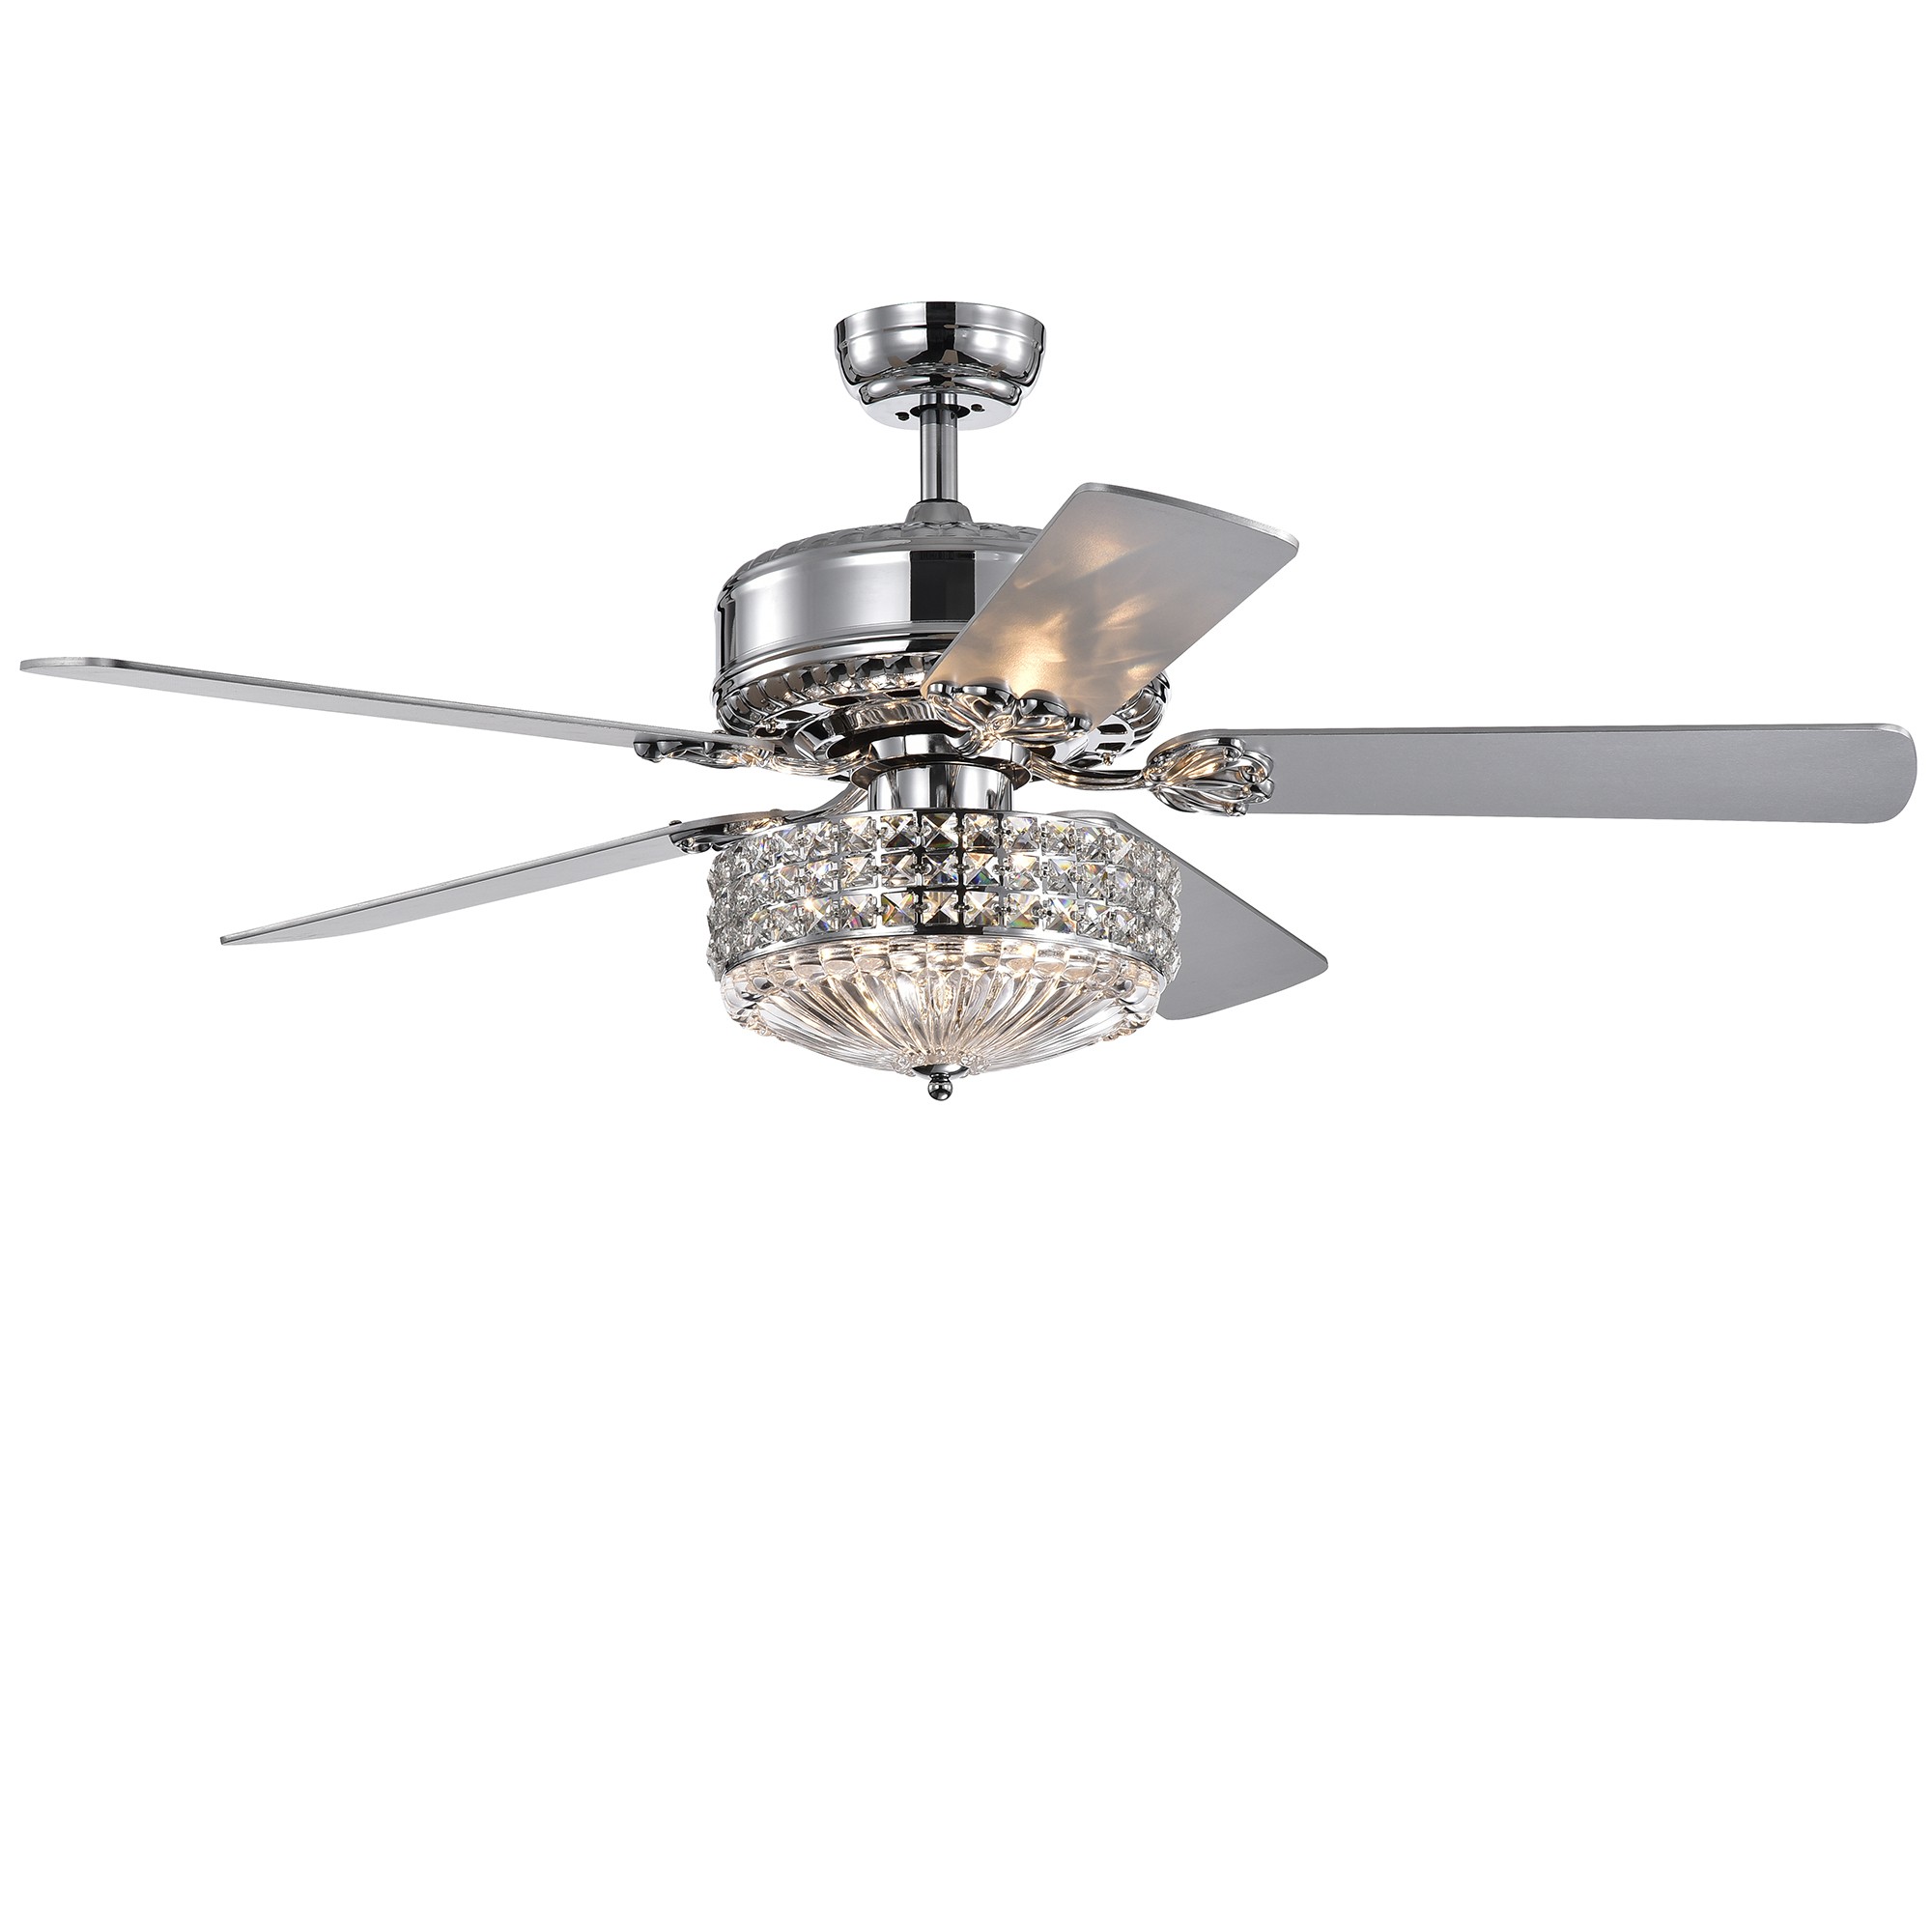 Gremane Chrome 52-inch Lighted Ceiling Fan with Crystal Shade (incl. Remote & 2 Color Option Blades)